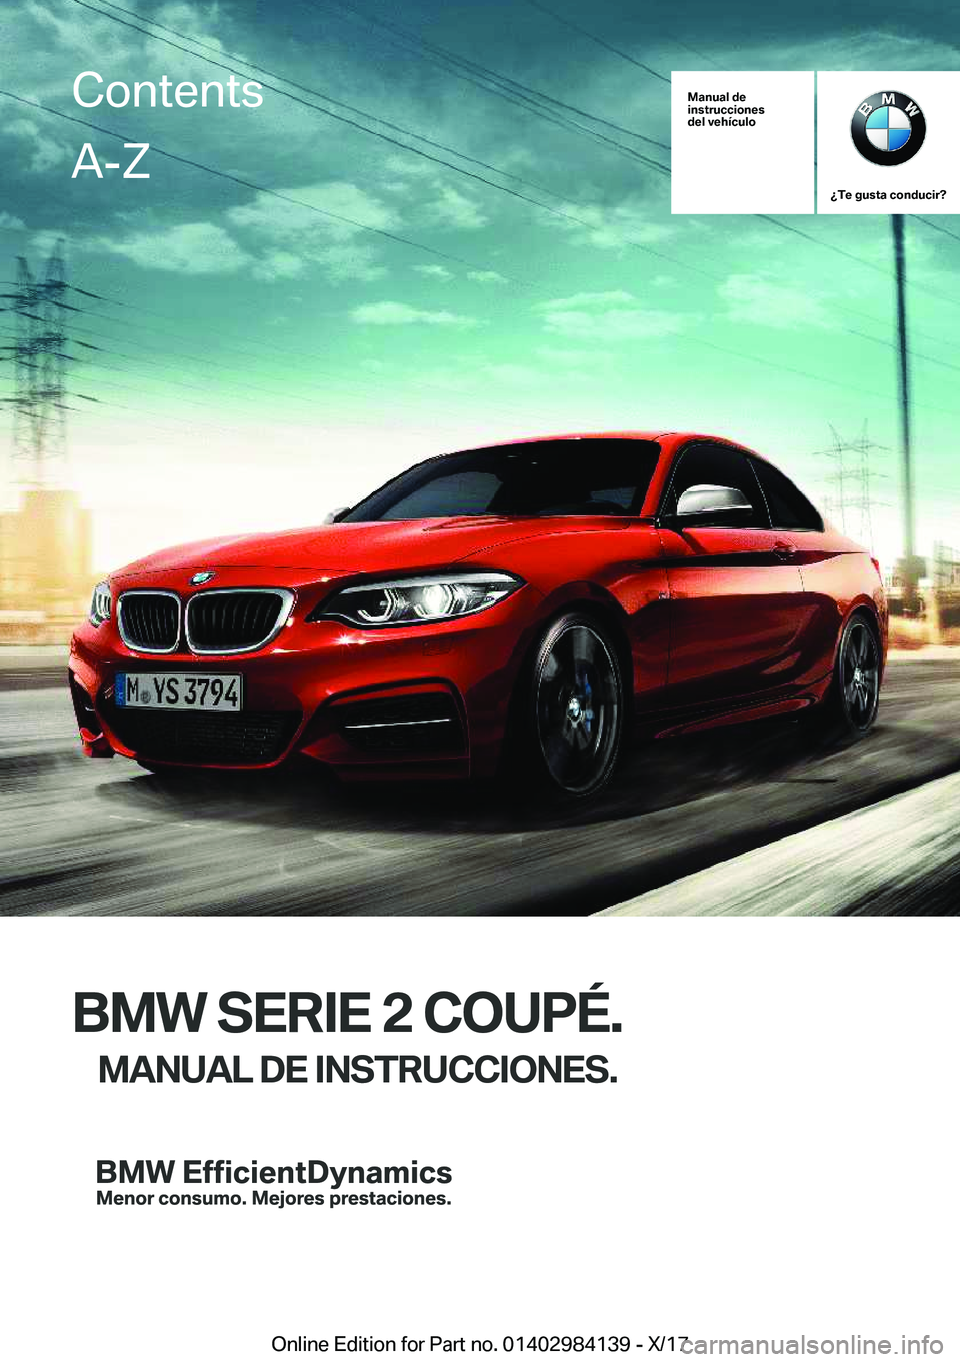 BMW 2 SERIES COUPE 2018  Manuales de Empleo (in Spanish) �M�a�n�u�a�l��d�e
�i�n�s�t�r�u�c�c�i�o�n�e�s
�d�e�l��v�e�h�